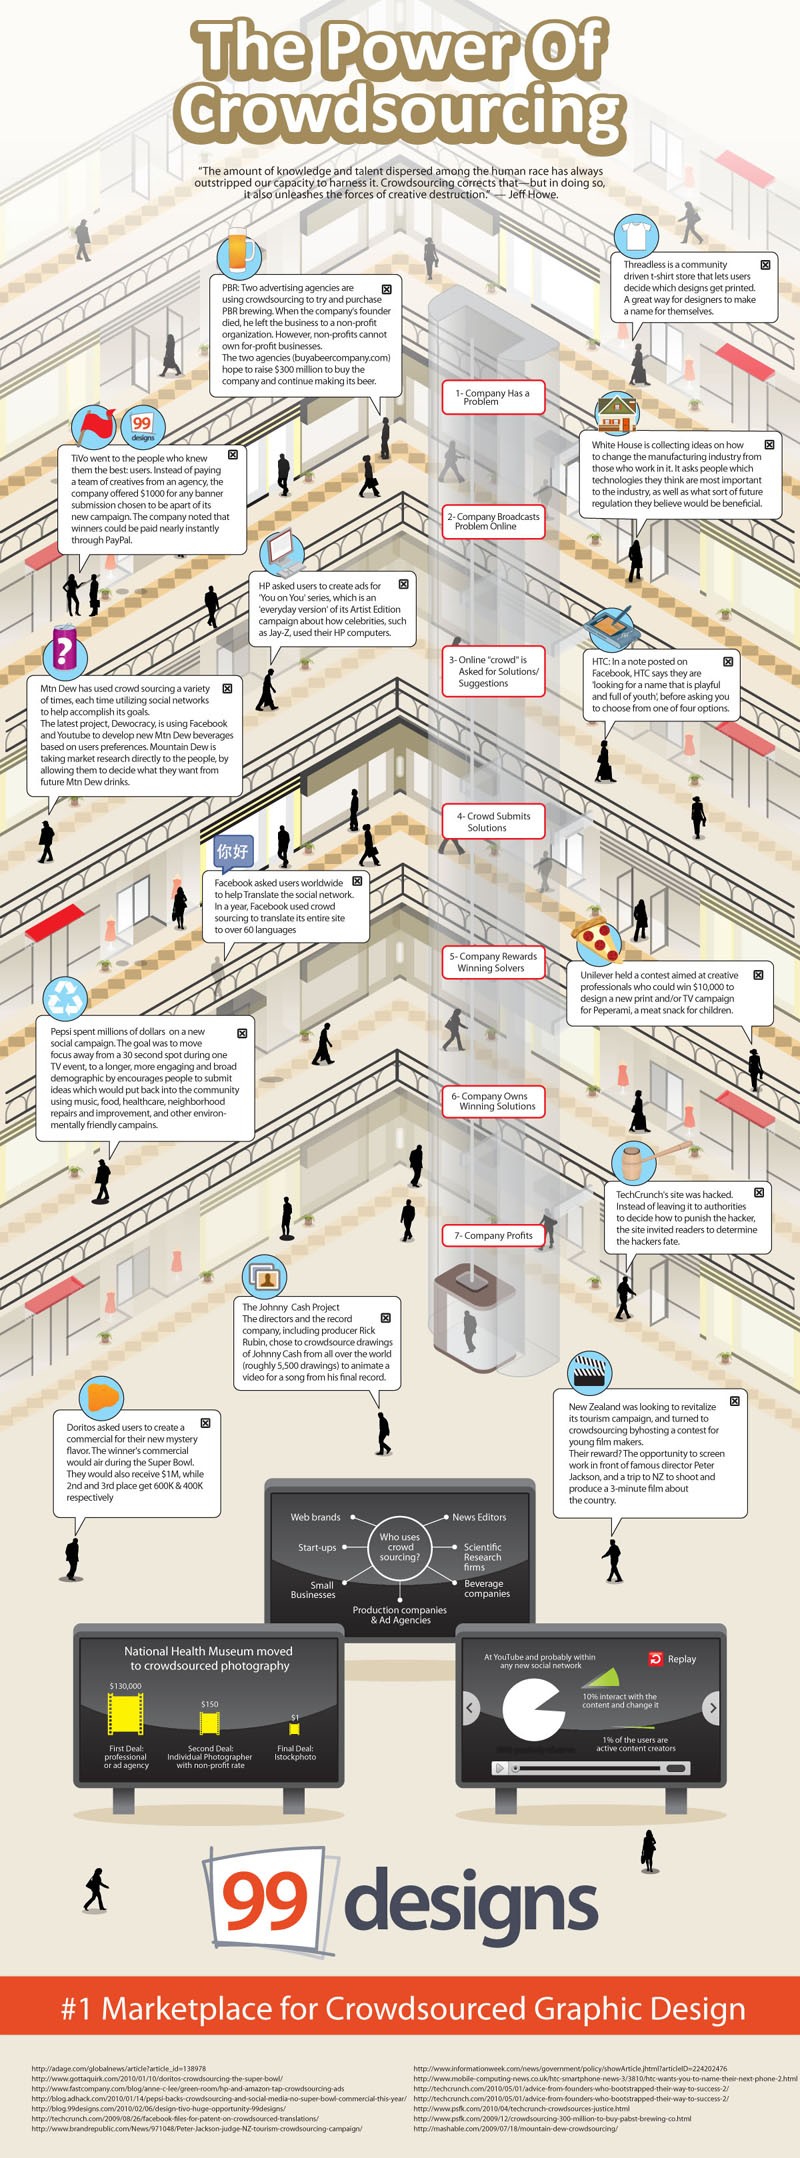 The Power of Crowdsourcing [Infographic]